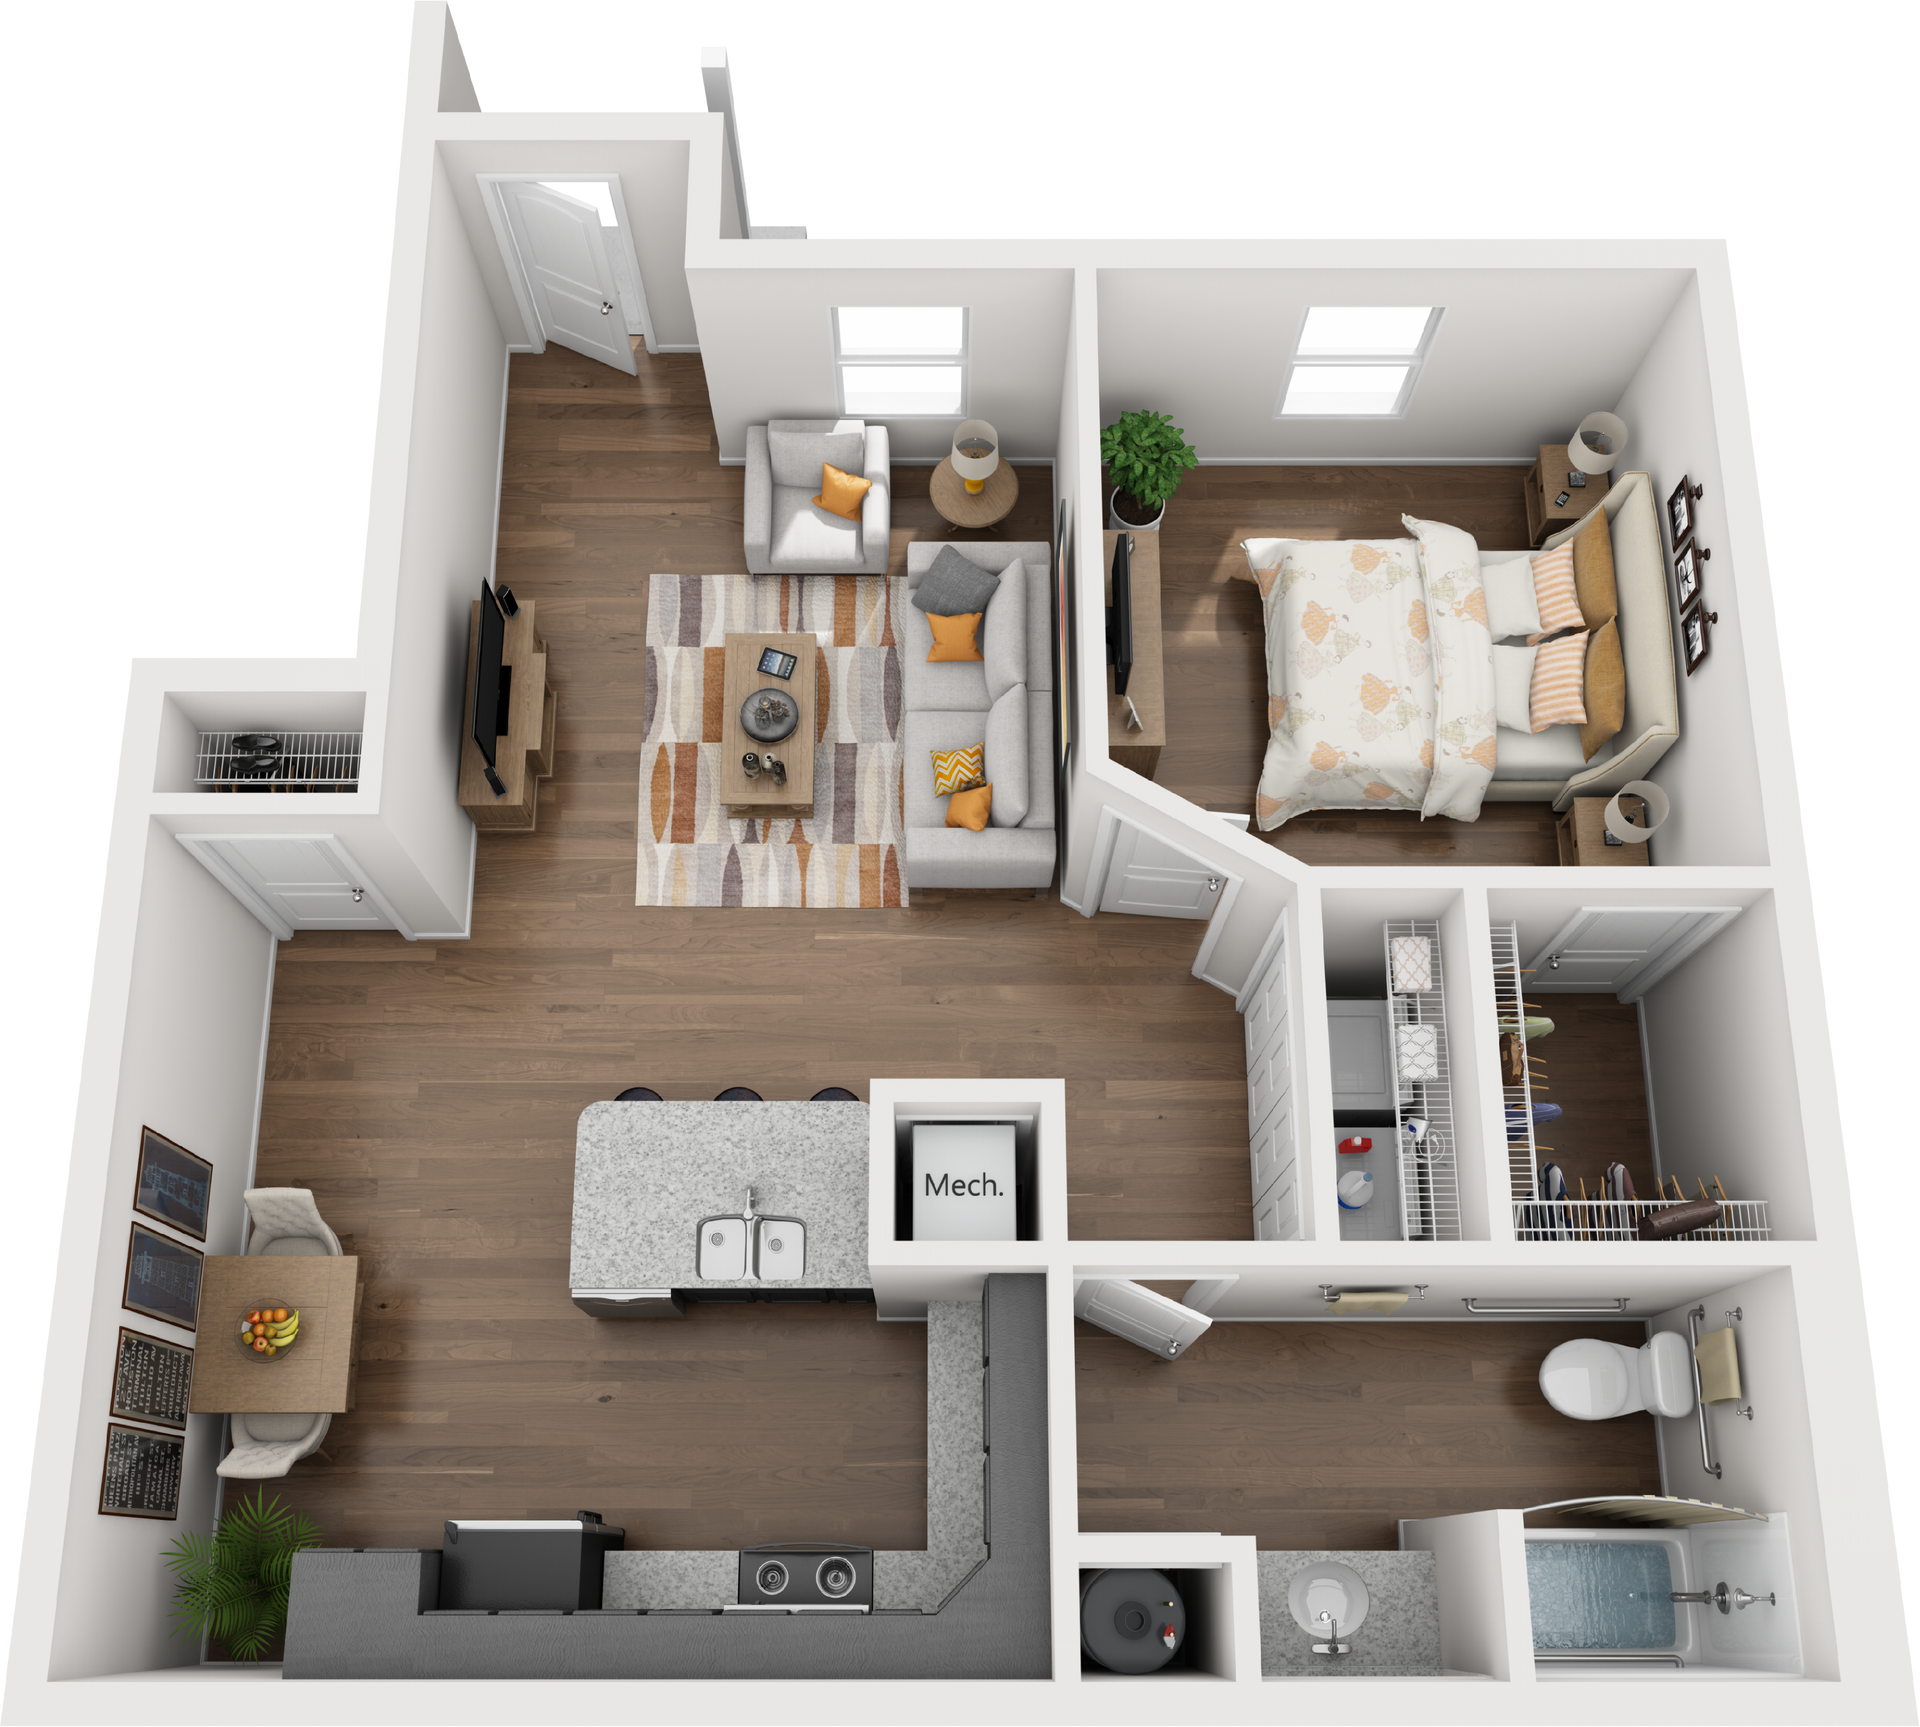 1 Bed Floor Plan with Carpet and Wood Flooring